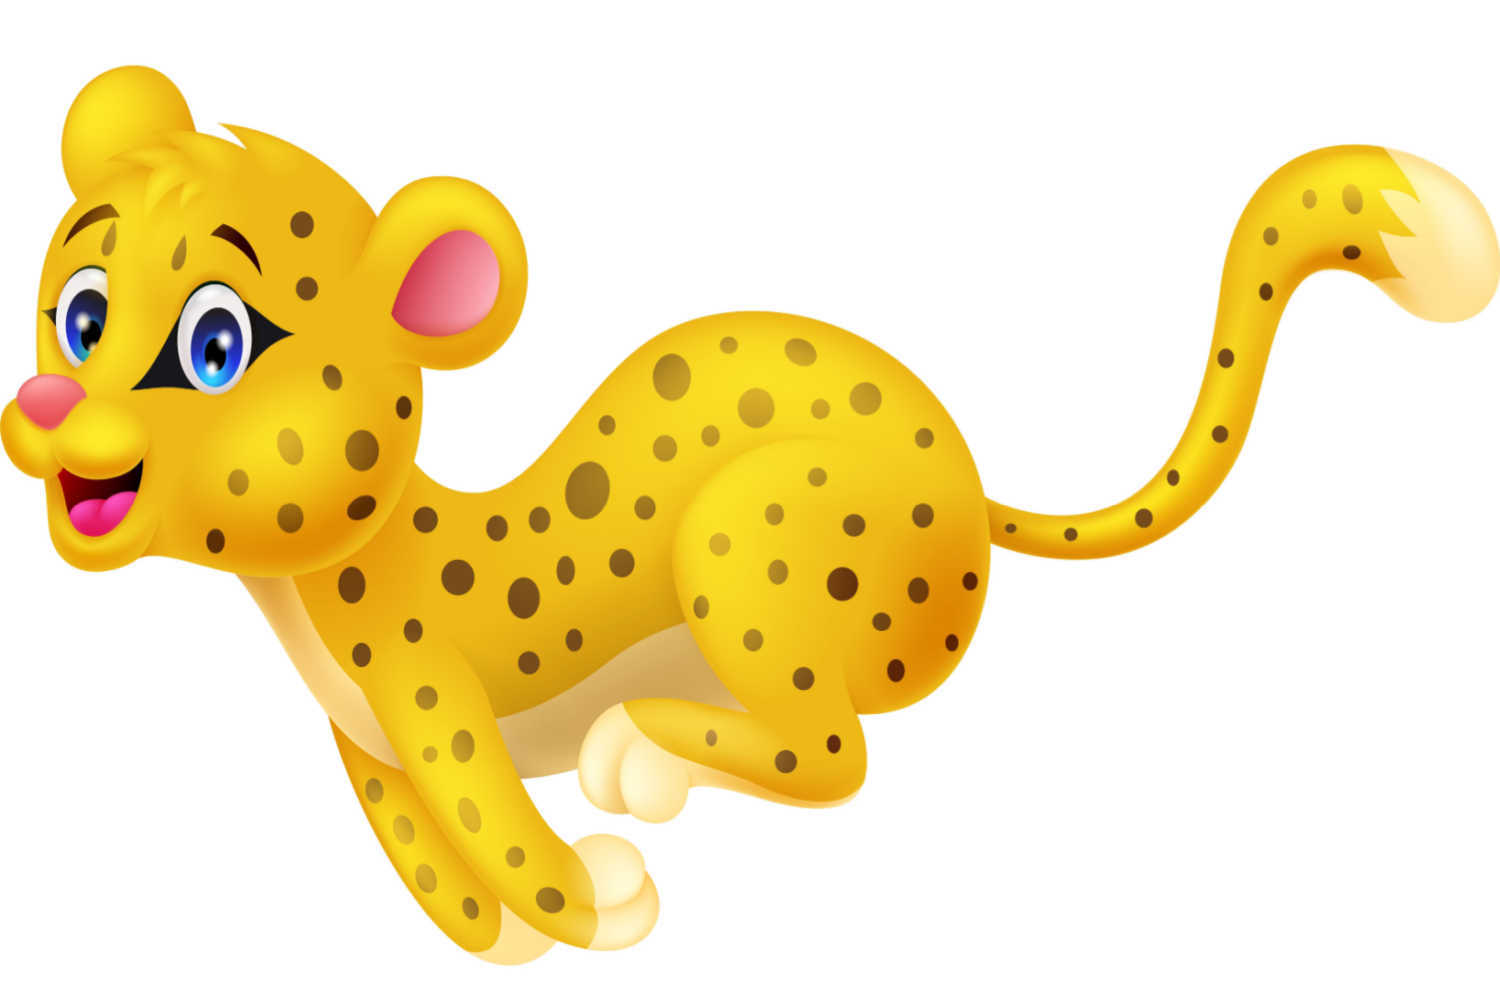 The Cheetah’s Race -short poems for kids to recite